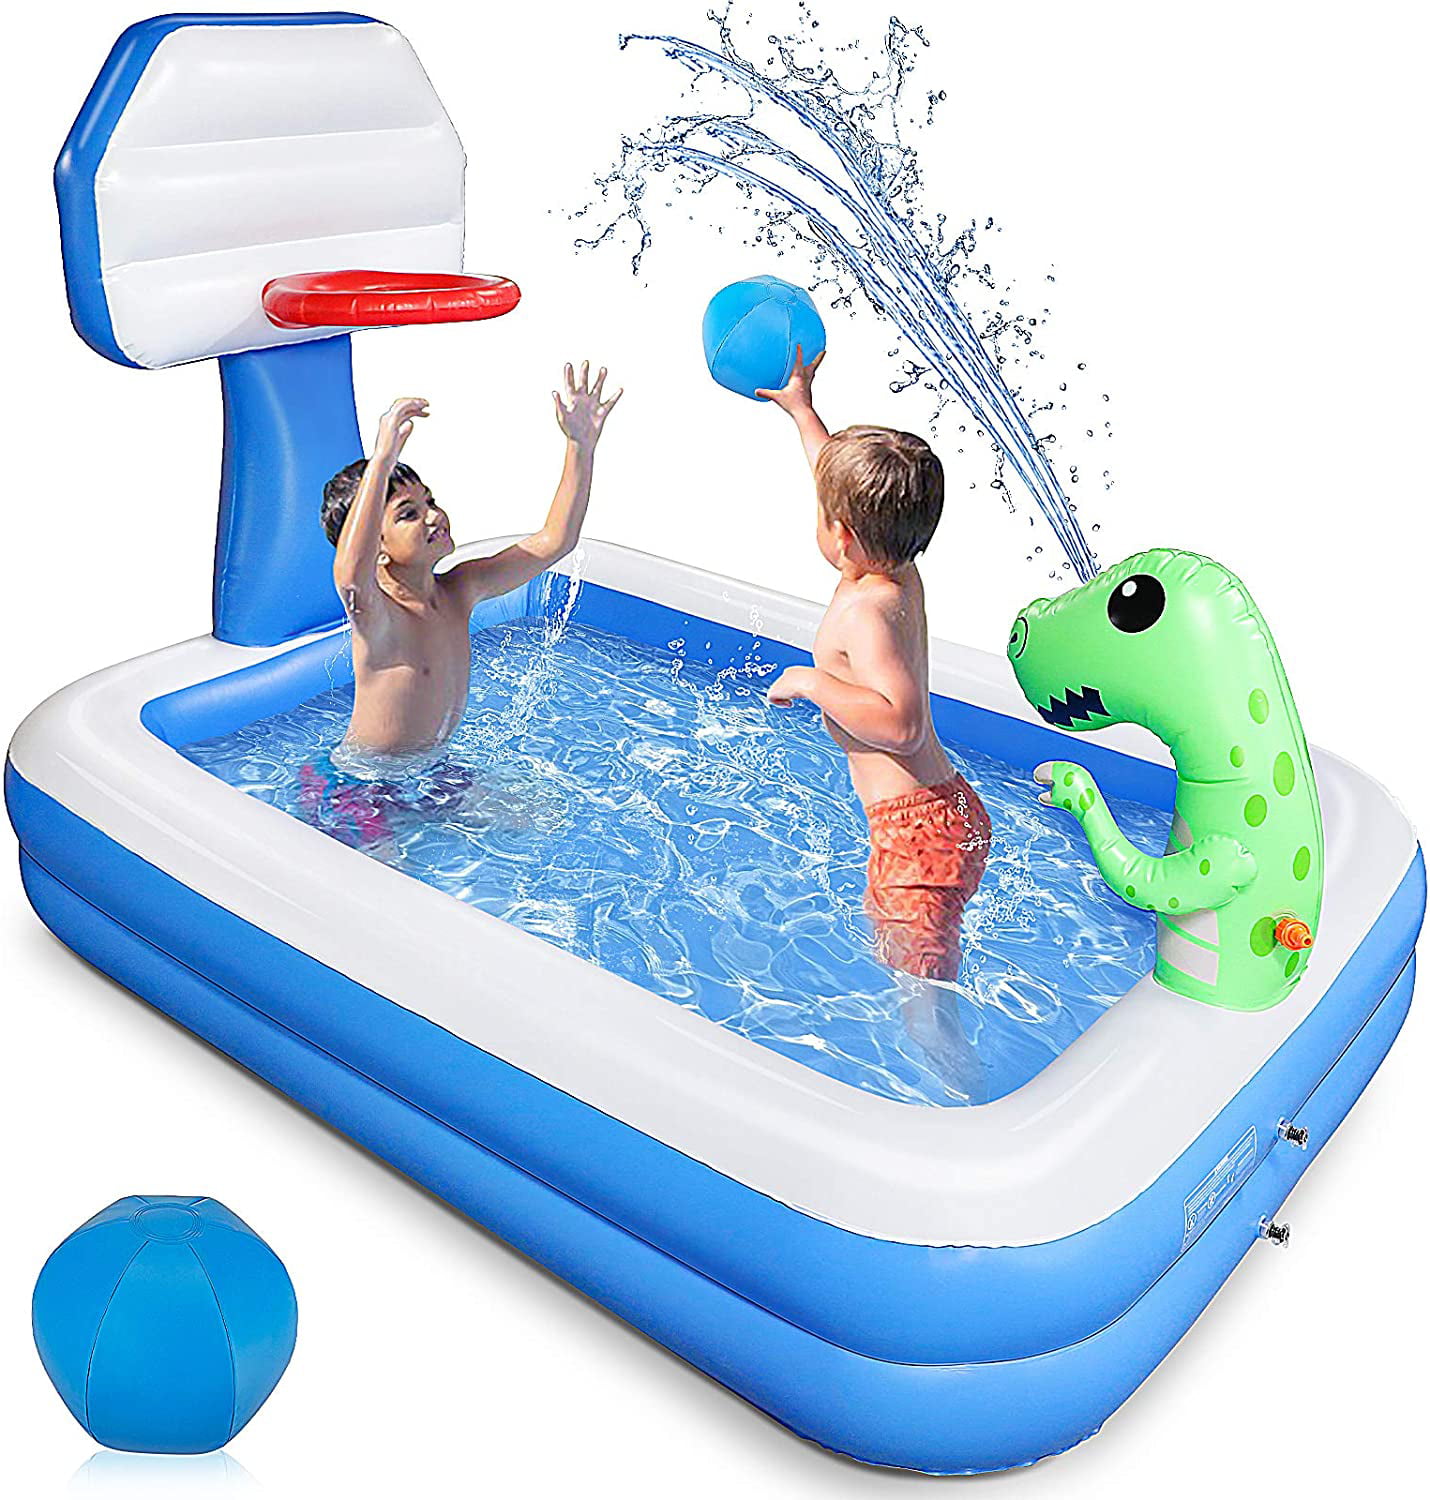 20" 50CM LARGE BEACH POOL PLAY BALL INFLATABLE FOR KIDS CHILDREN FUN TOY 83070 